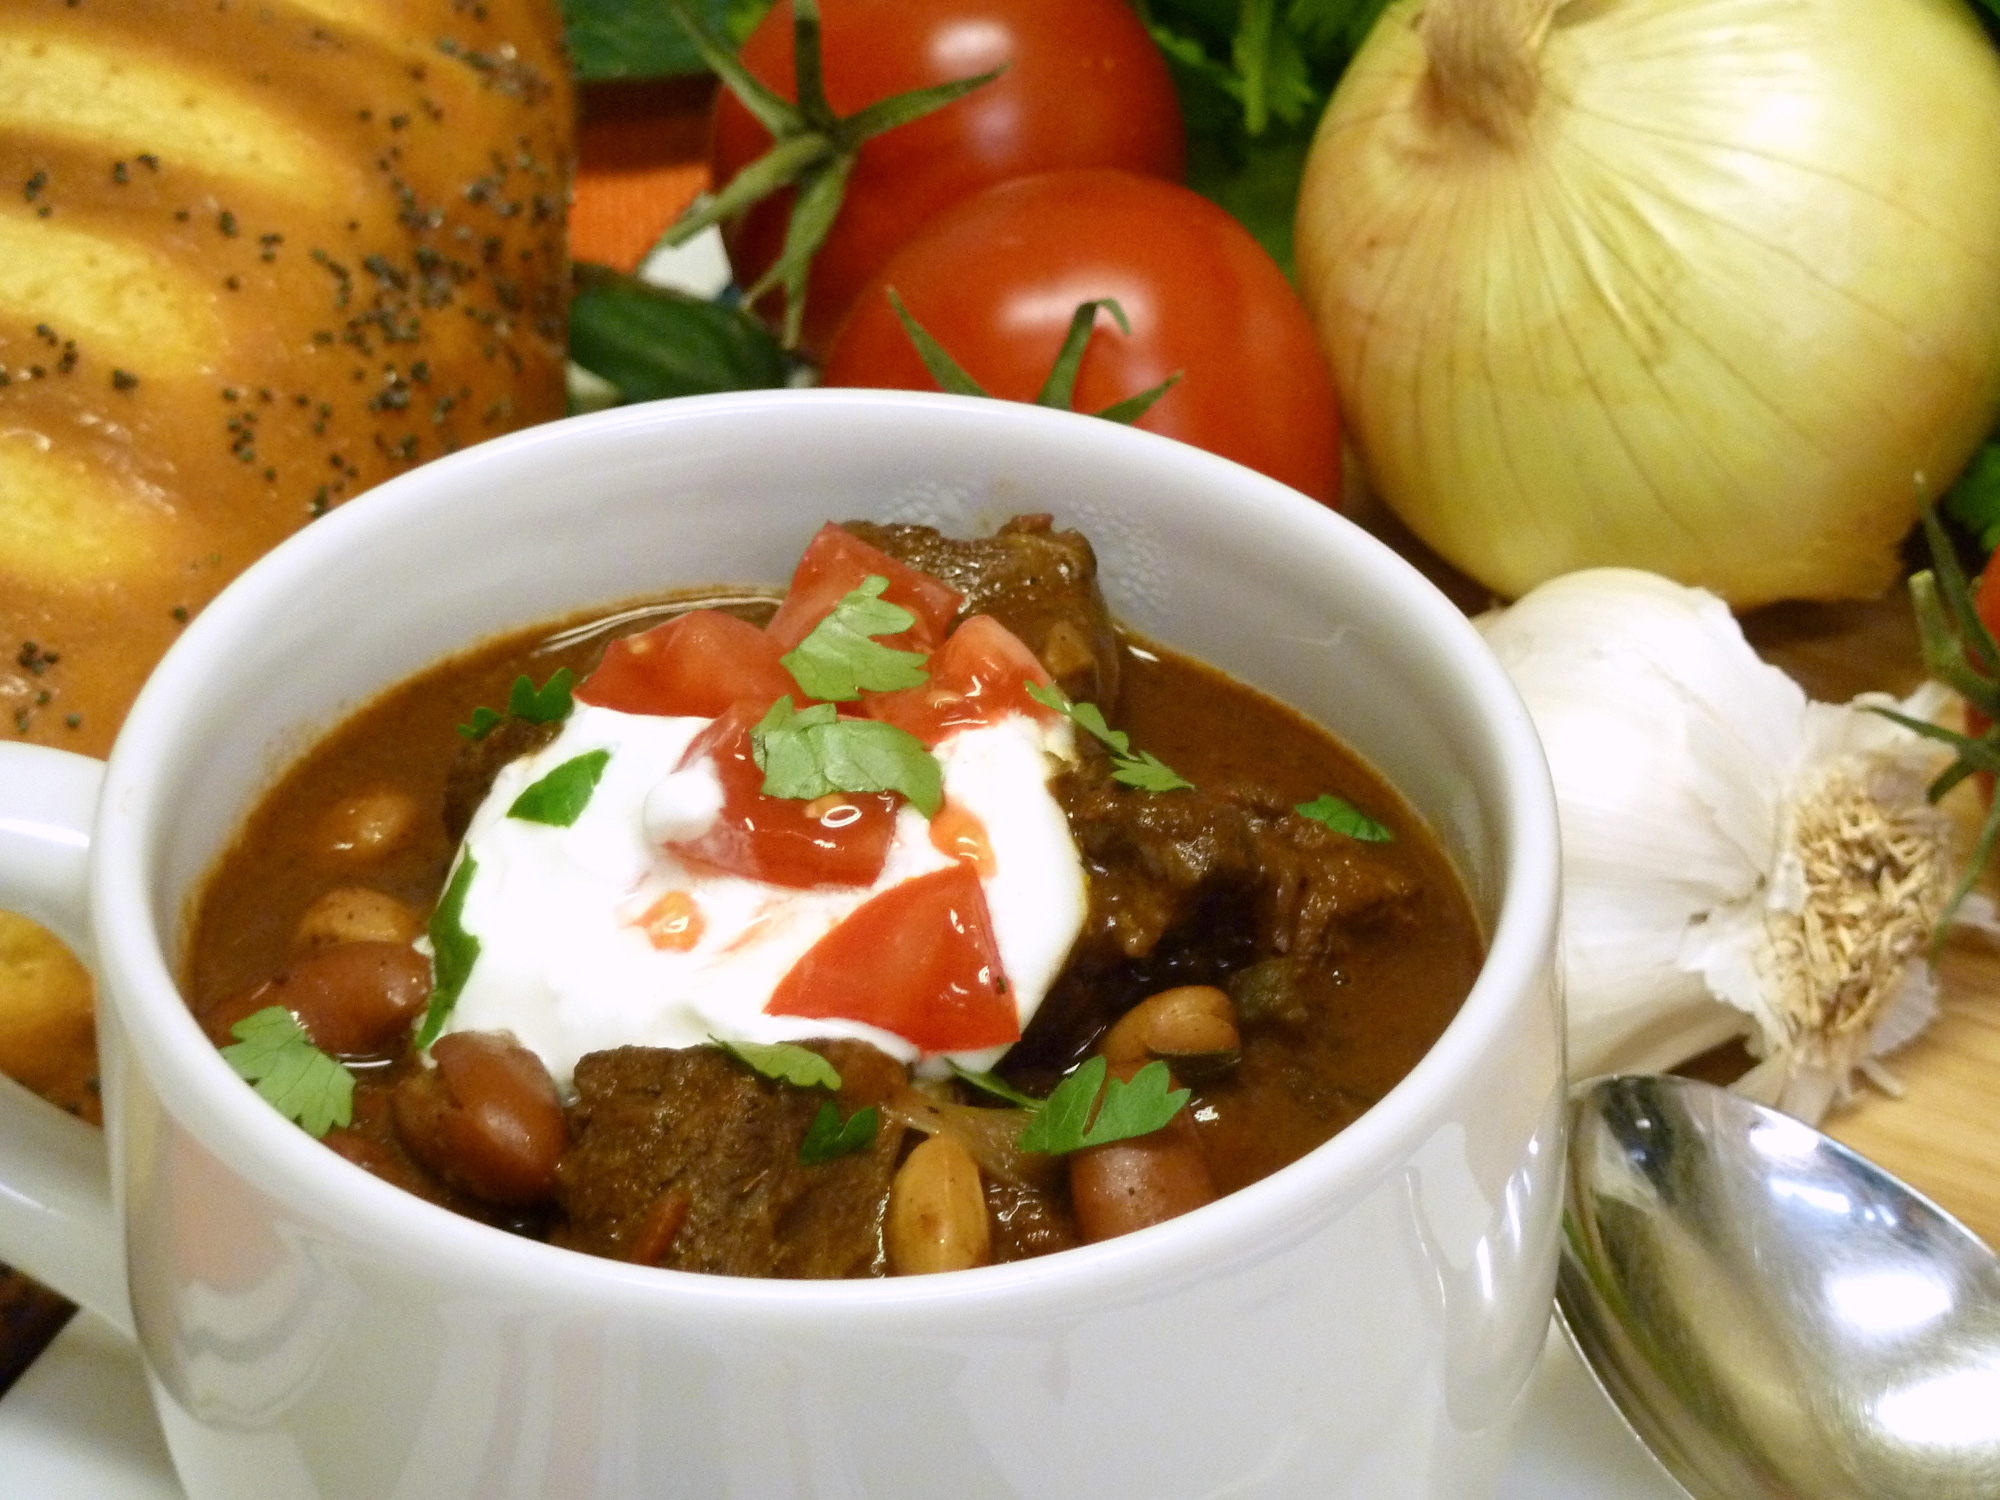 Easy Cowboy Chili with beans makes an inexpensive, filling meal.